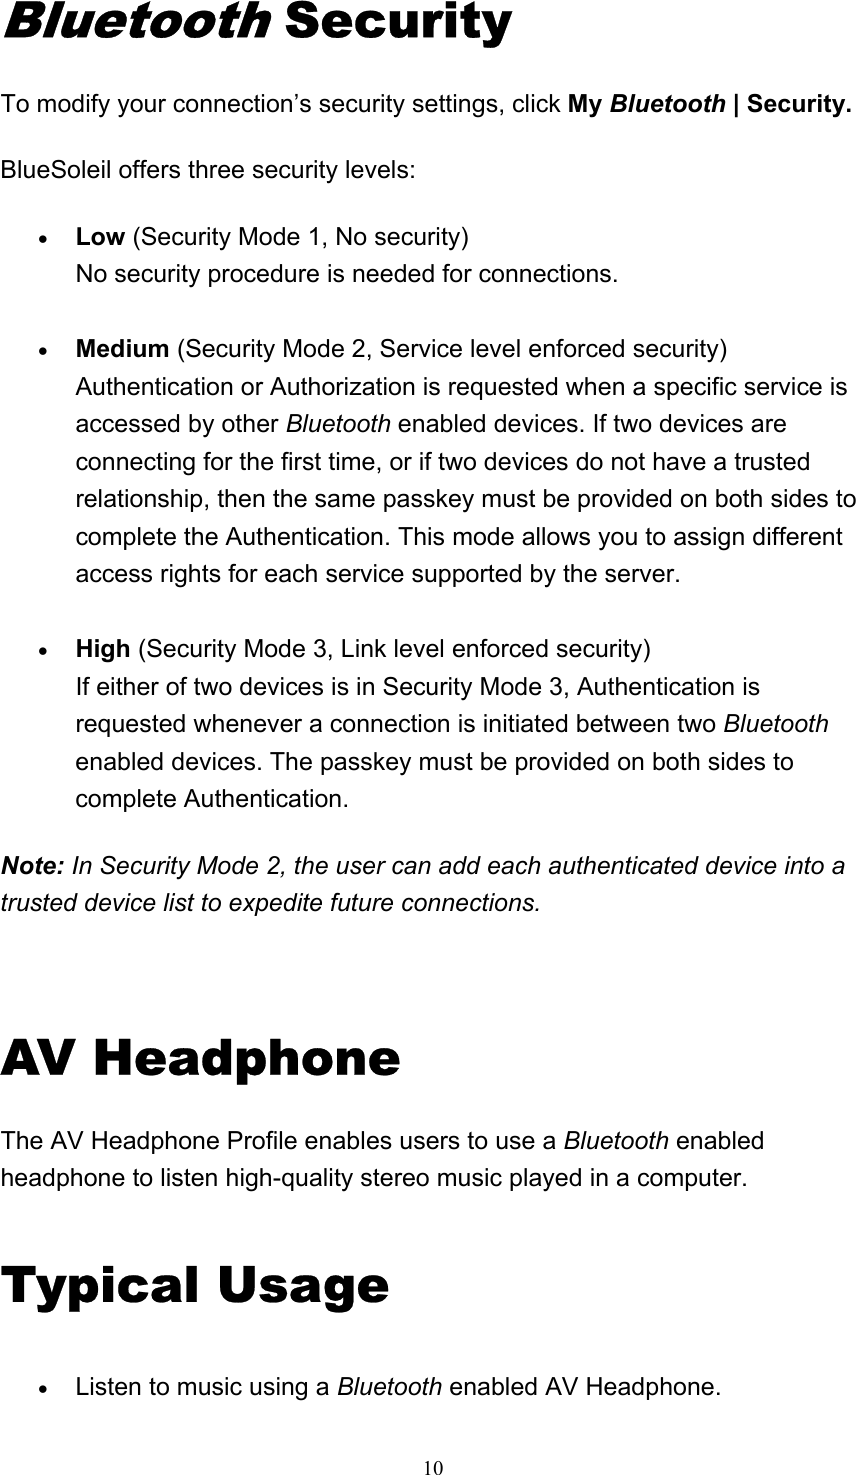   10Bluetooth Security To modify your connection’s security settings, click My Bluetooth | Security. BlueSoleil offers three security levels: • Low (Security Mode 1, No security) No security procedure is needed for connections.     • Medium (Security Mode 2, Service level enforced security) Authentication or Authorization is requested when a specific service is accessed by other Bluetooth enabled devices. If two devices are connecting for the first time, or if two devices do not have a trusted relationship, then the same passkey must be provided on both sides to complete the Authentication. This mode allows you to assign different access rights for each service supported by the server.     • High (Security Mode 3, Link level enforced security) If either of two devices is in Security Mode 3, Authentication is requested whenever a connection is initiated between two Bluetooth enabled devices. The passkey must be provided on both sides to complete Authentication.    Note: In Security Mode 2, the user can add each authenticated device into a trusted device list to expedite future connections.   AV Headphone The AV Headphone Profile enables users to use a Bluetooth enabled headphone to listen high-quality stereo music played in a computer. Typical Usage • Listen to music using a Bluetooth enabled AV Headphone.   